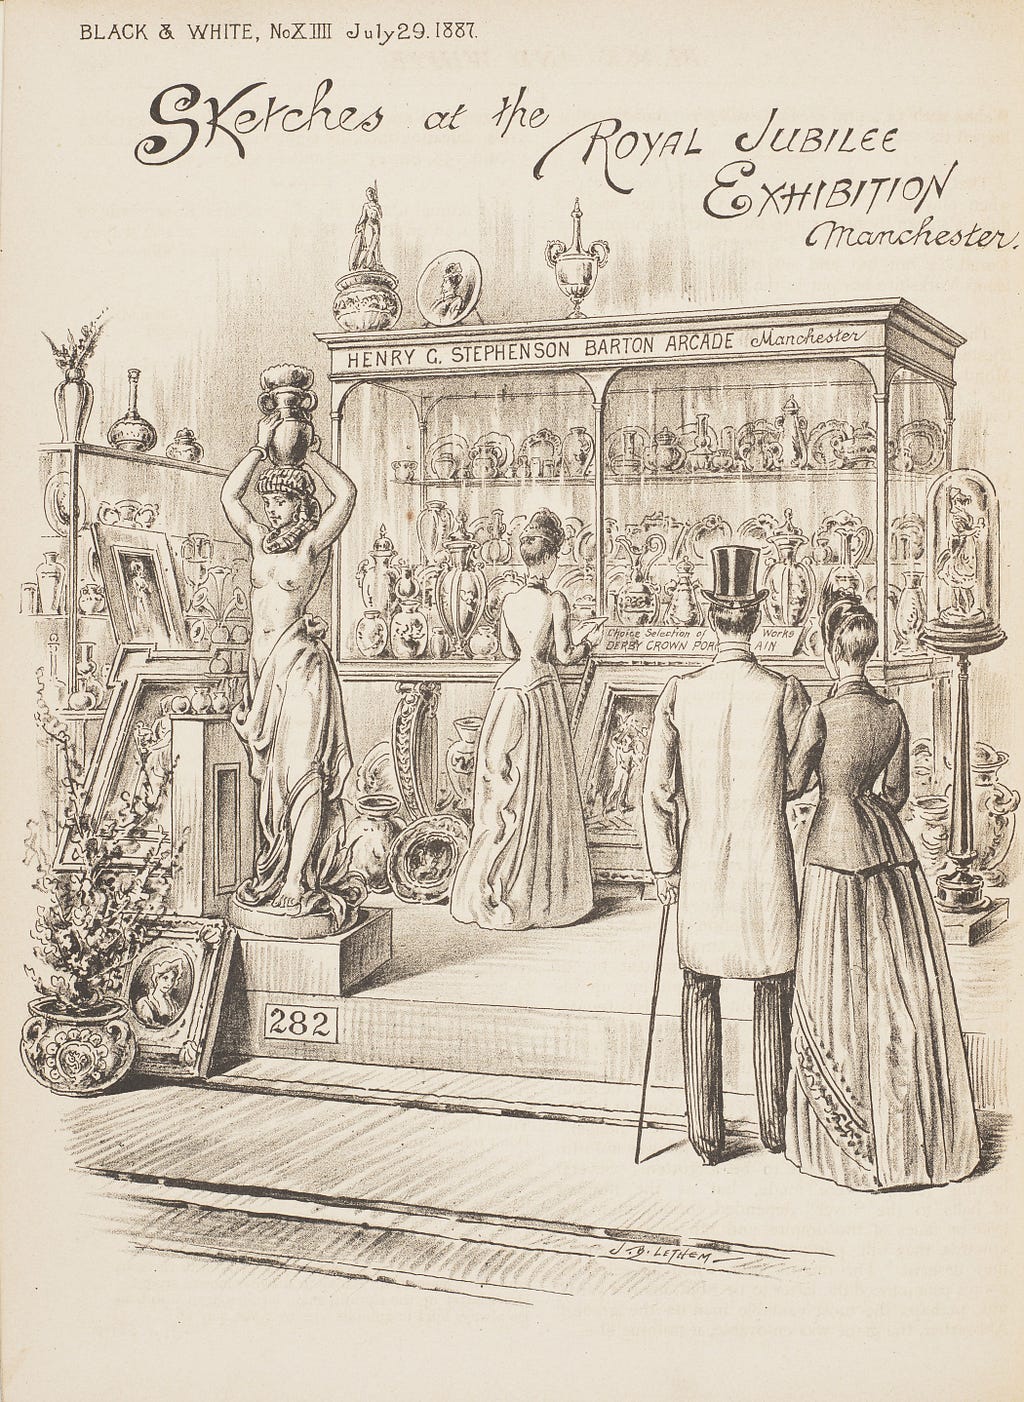 A young lady in Victorian dress browses a large, glass and china-filled cabinet. A well-dressed couple approach arm-in-arm.